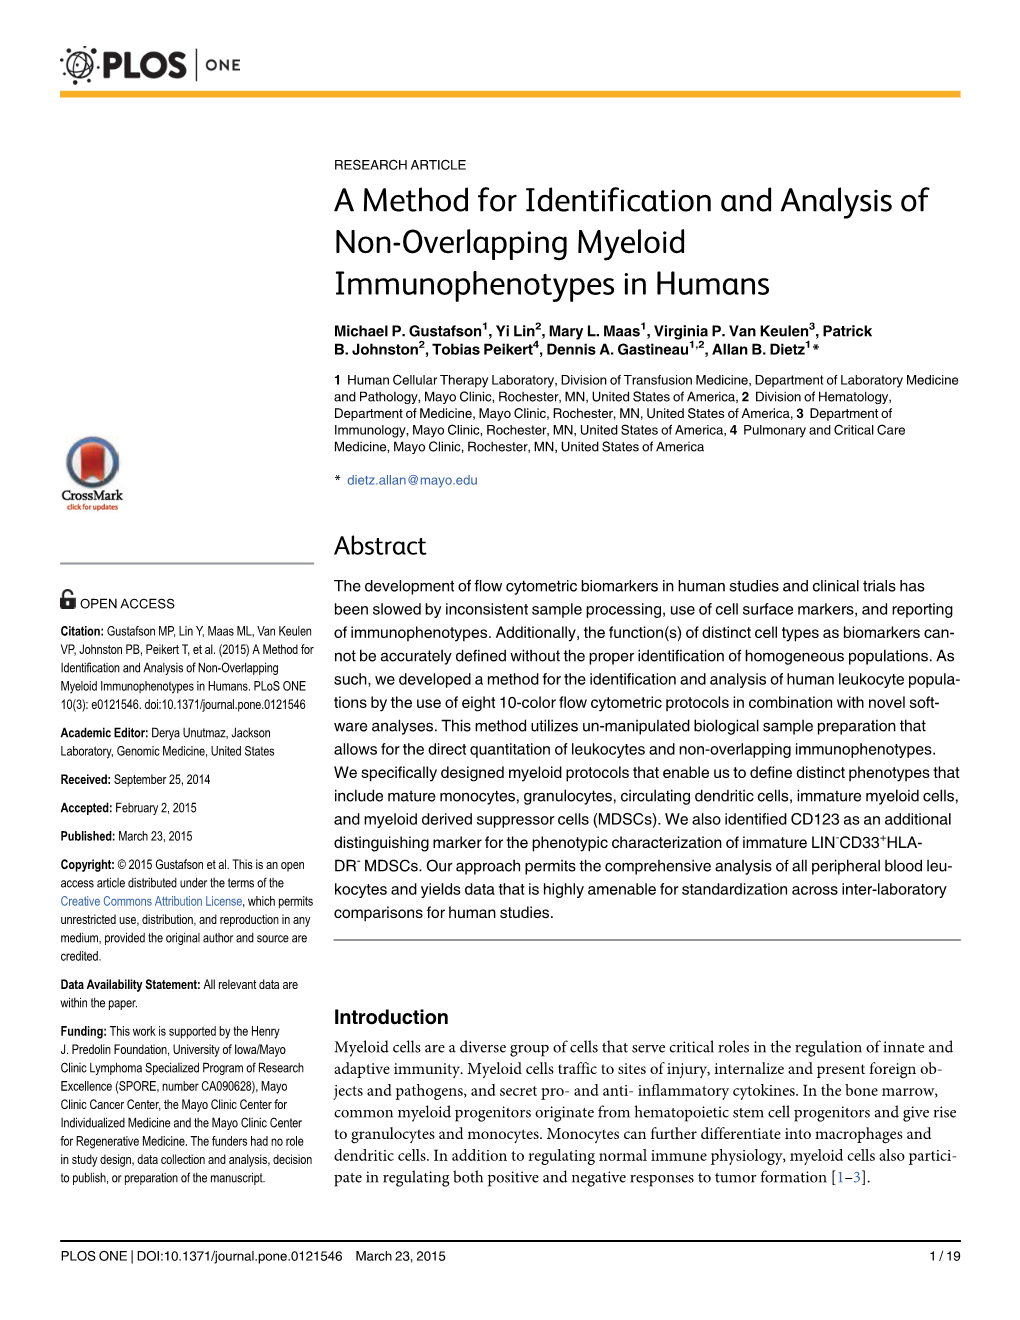 A Method for Identification and Analysis of Non-Overlapping Myeloid Immunophenotypes in Humans